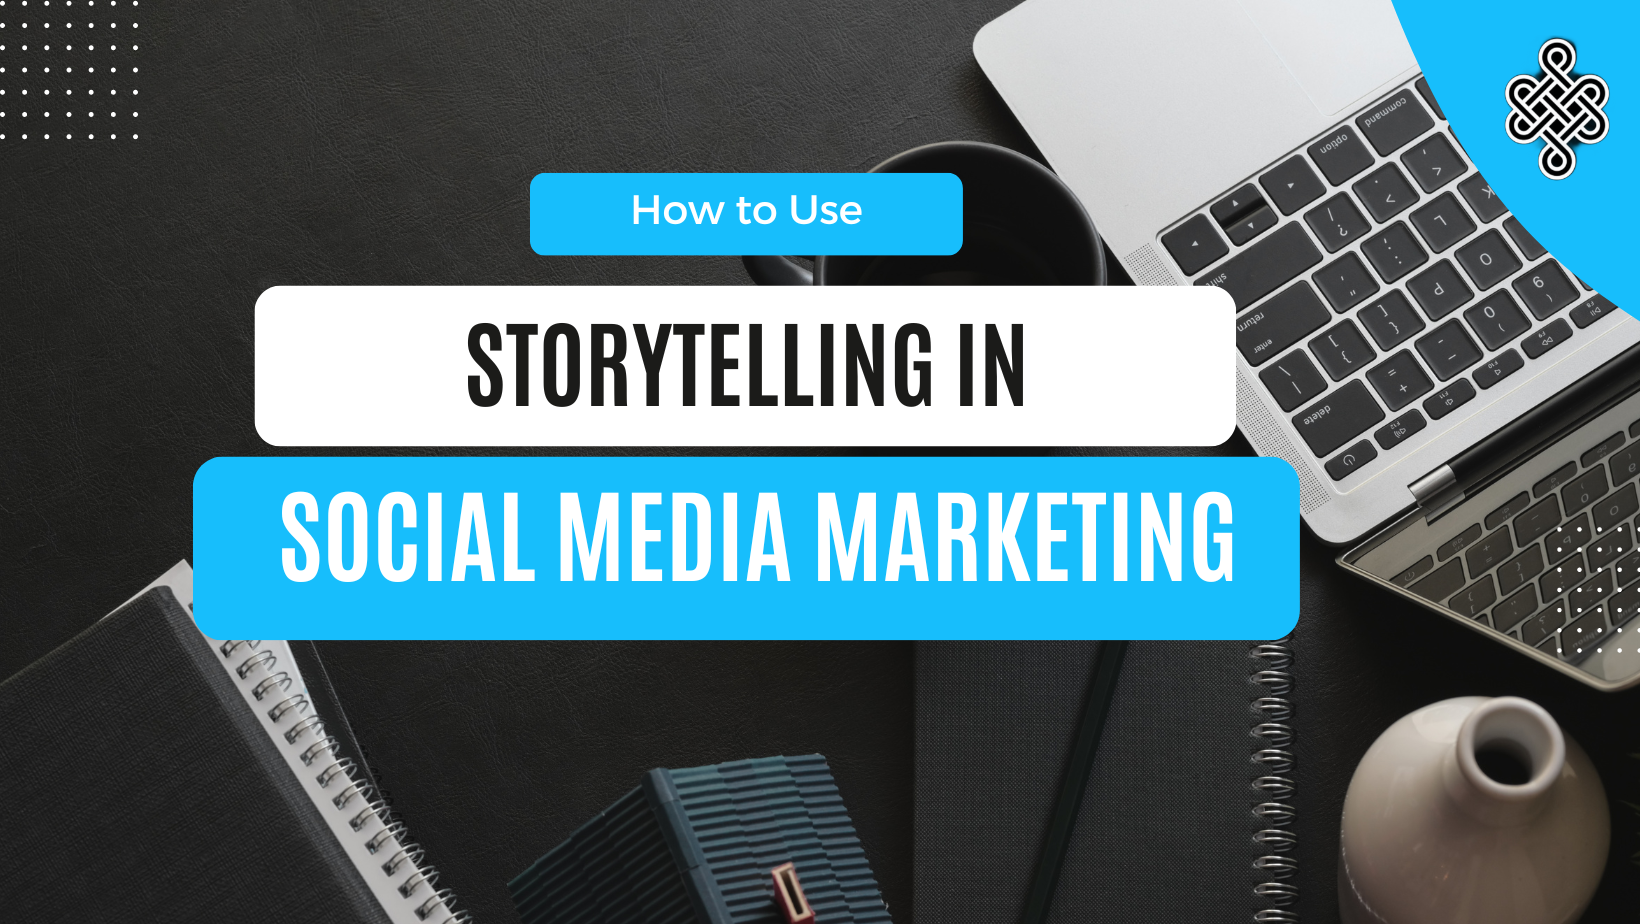 How to Use Storytelling in Social Media Marketing: Tips and Techniques